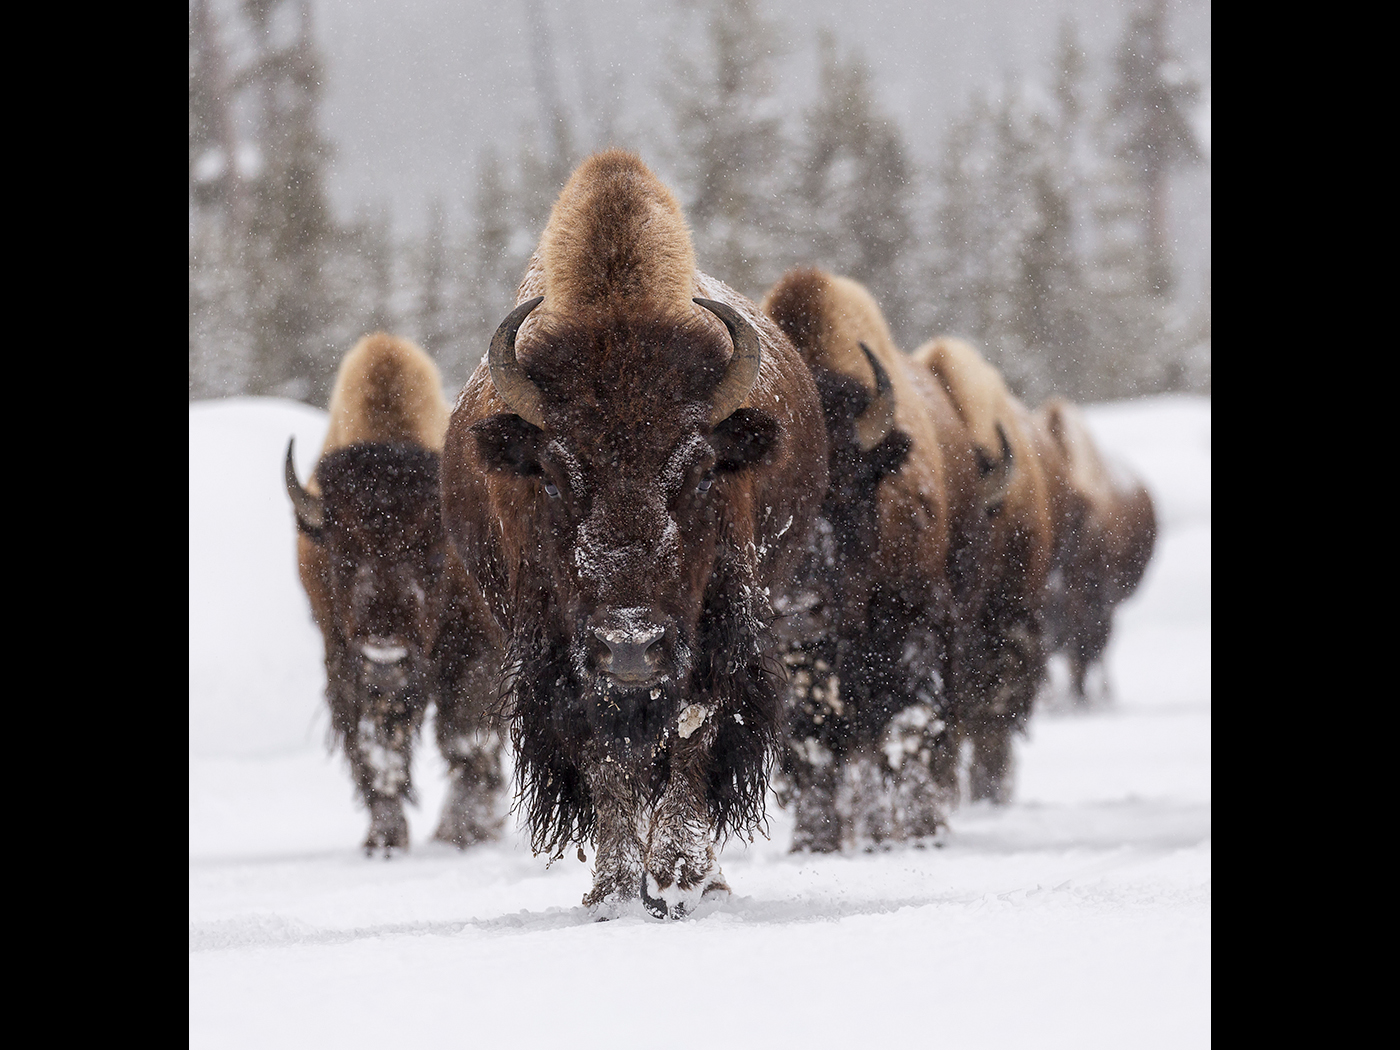 Bison Approaching by Kevin Lomax